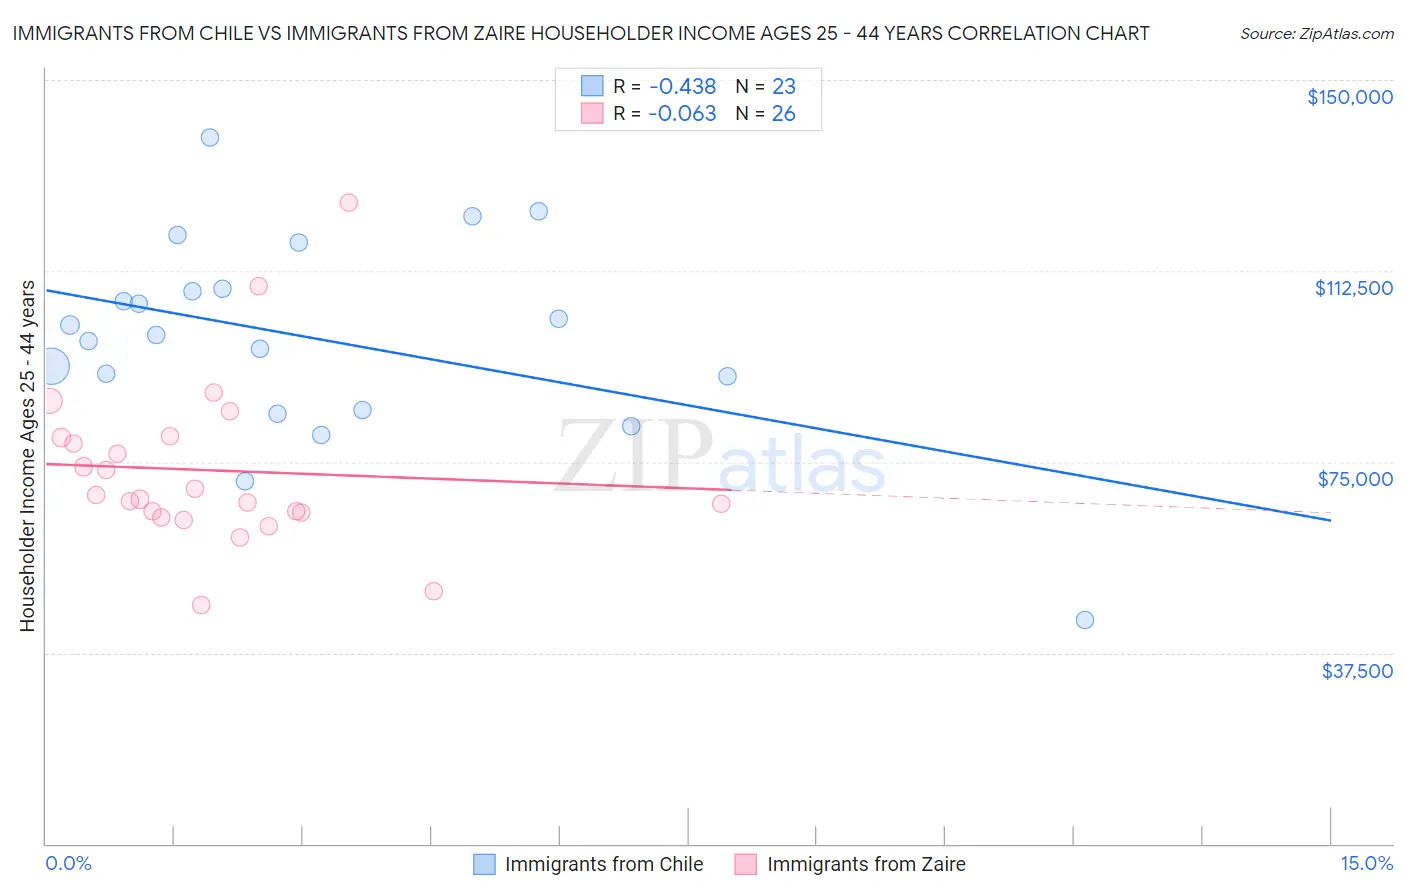 Immigrants from Chile vs Immigrants from Zaire Householder Income Ages 25 - 44 years